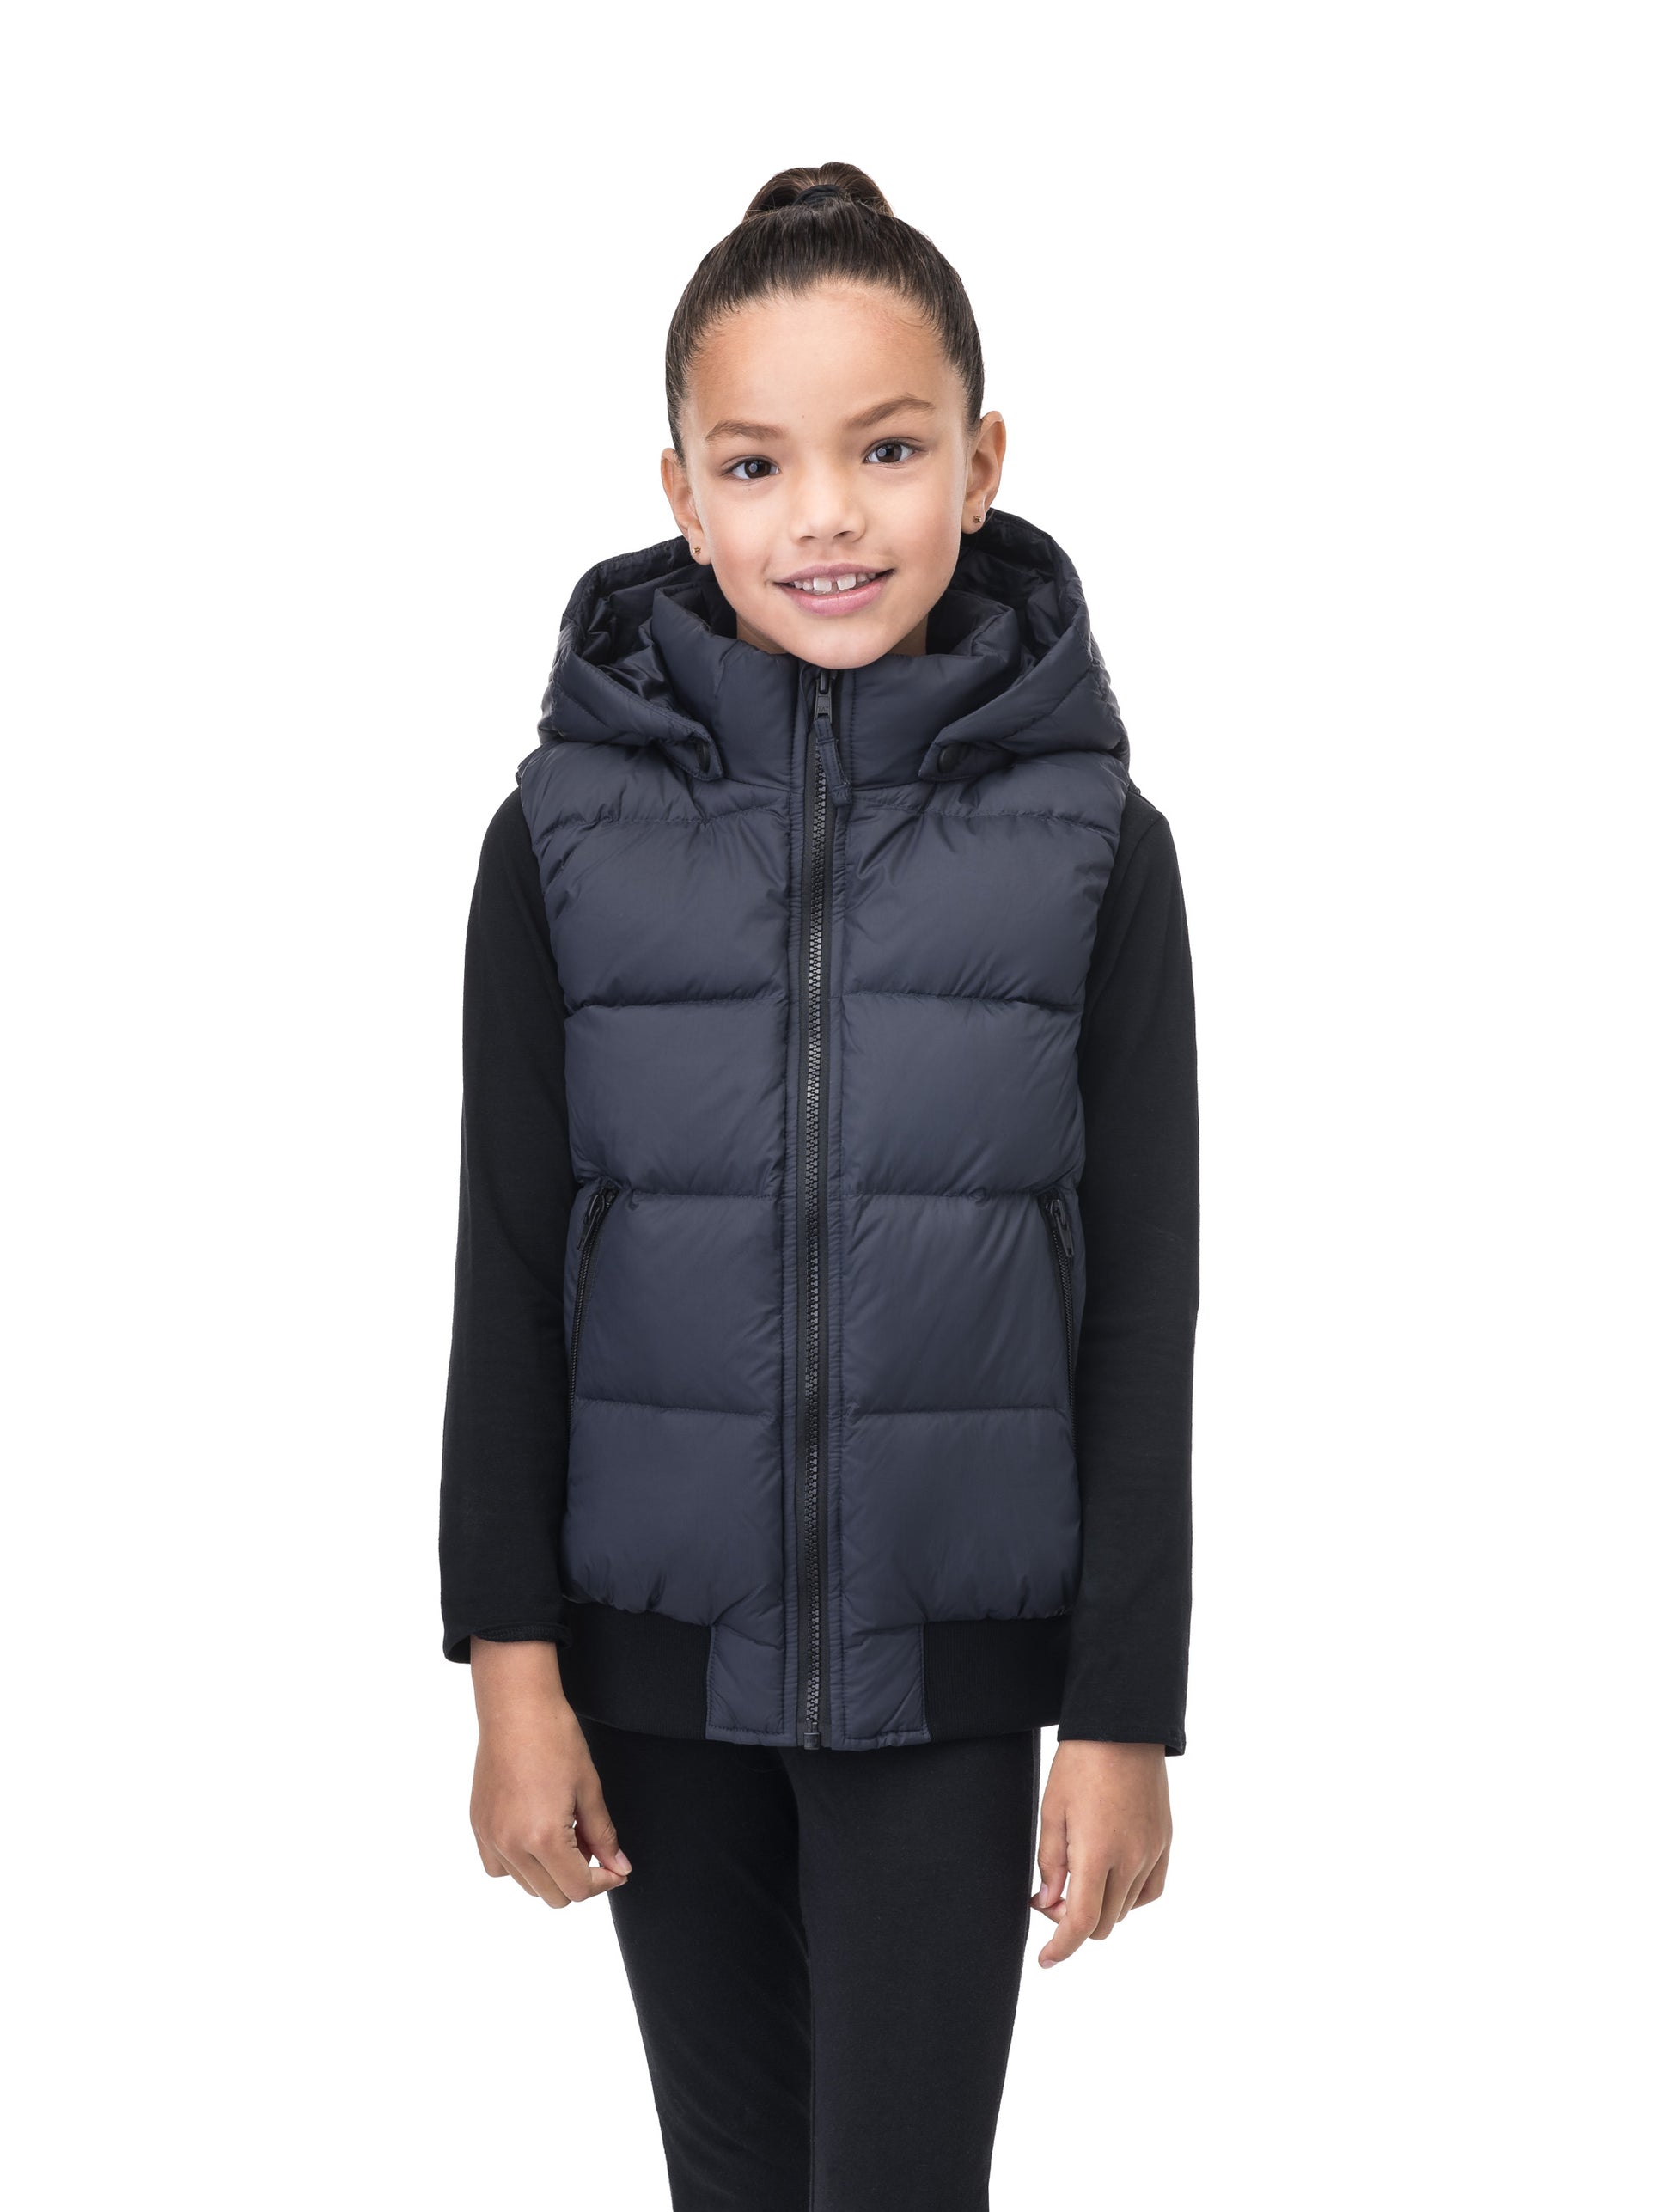 Sleeveless down filled kids vest with a hood and contrast zipper details in Navy